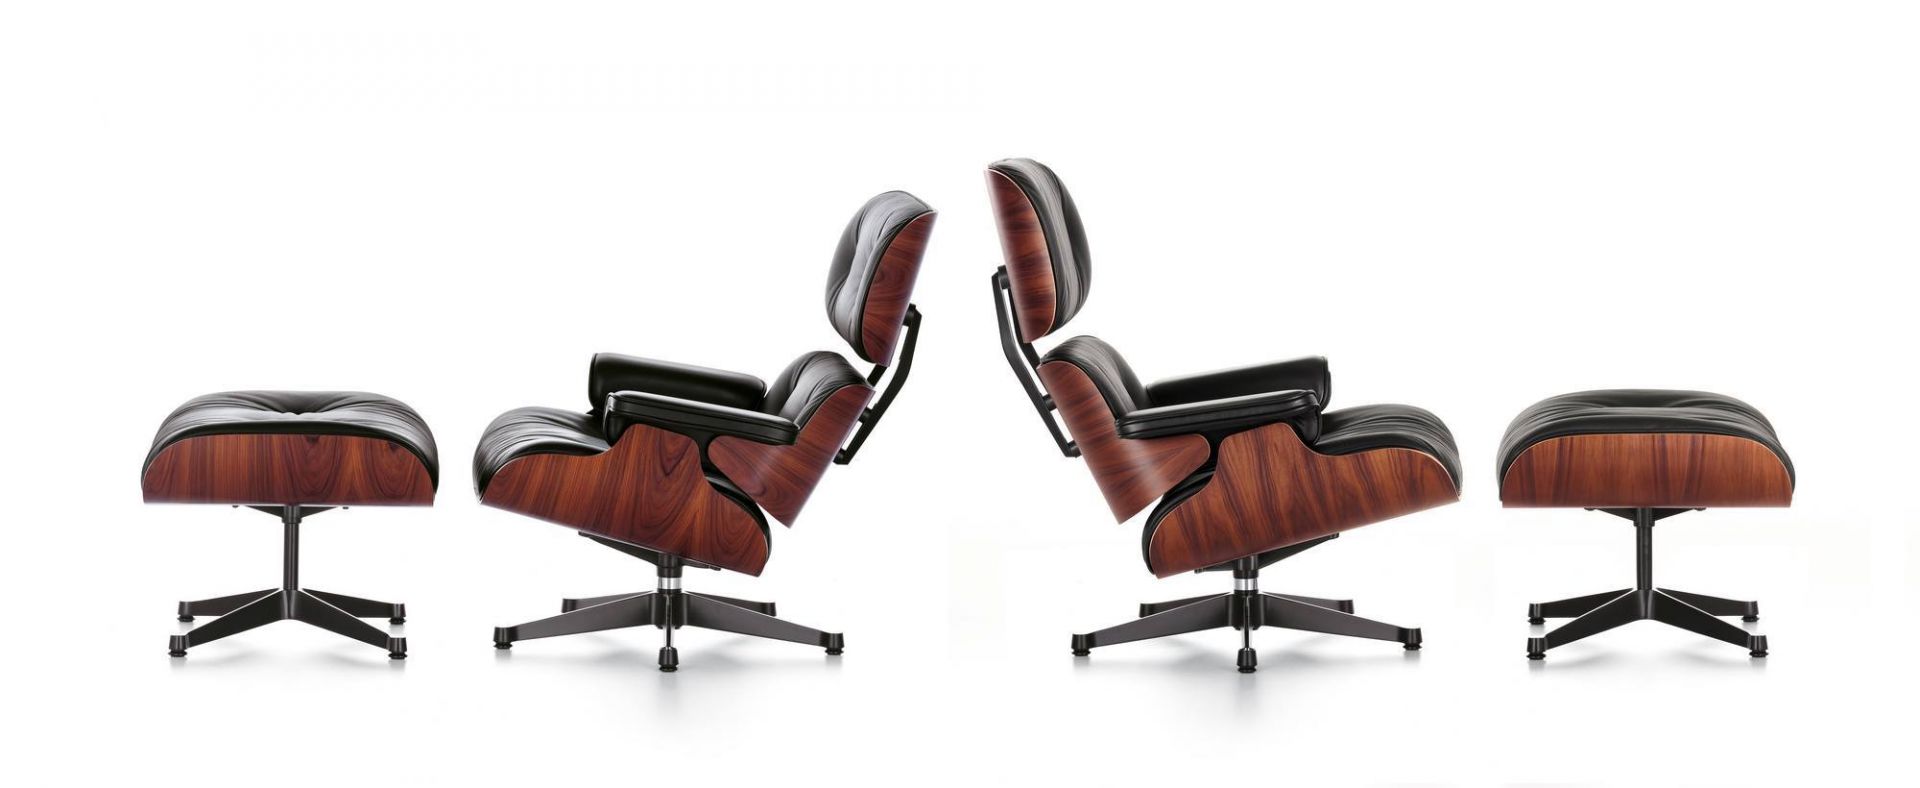 Eames Lounge Chair & Ottoman armchair Vitra Cherry - Premium F leather - polished - black sides